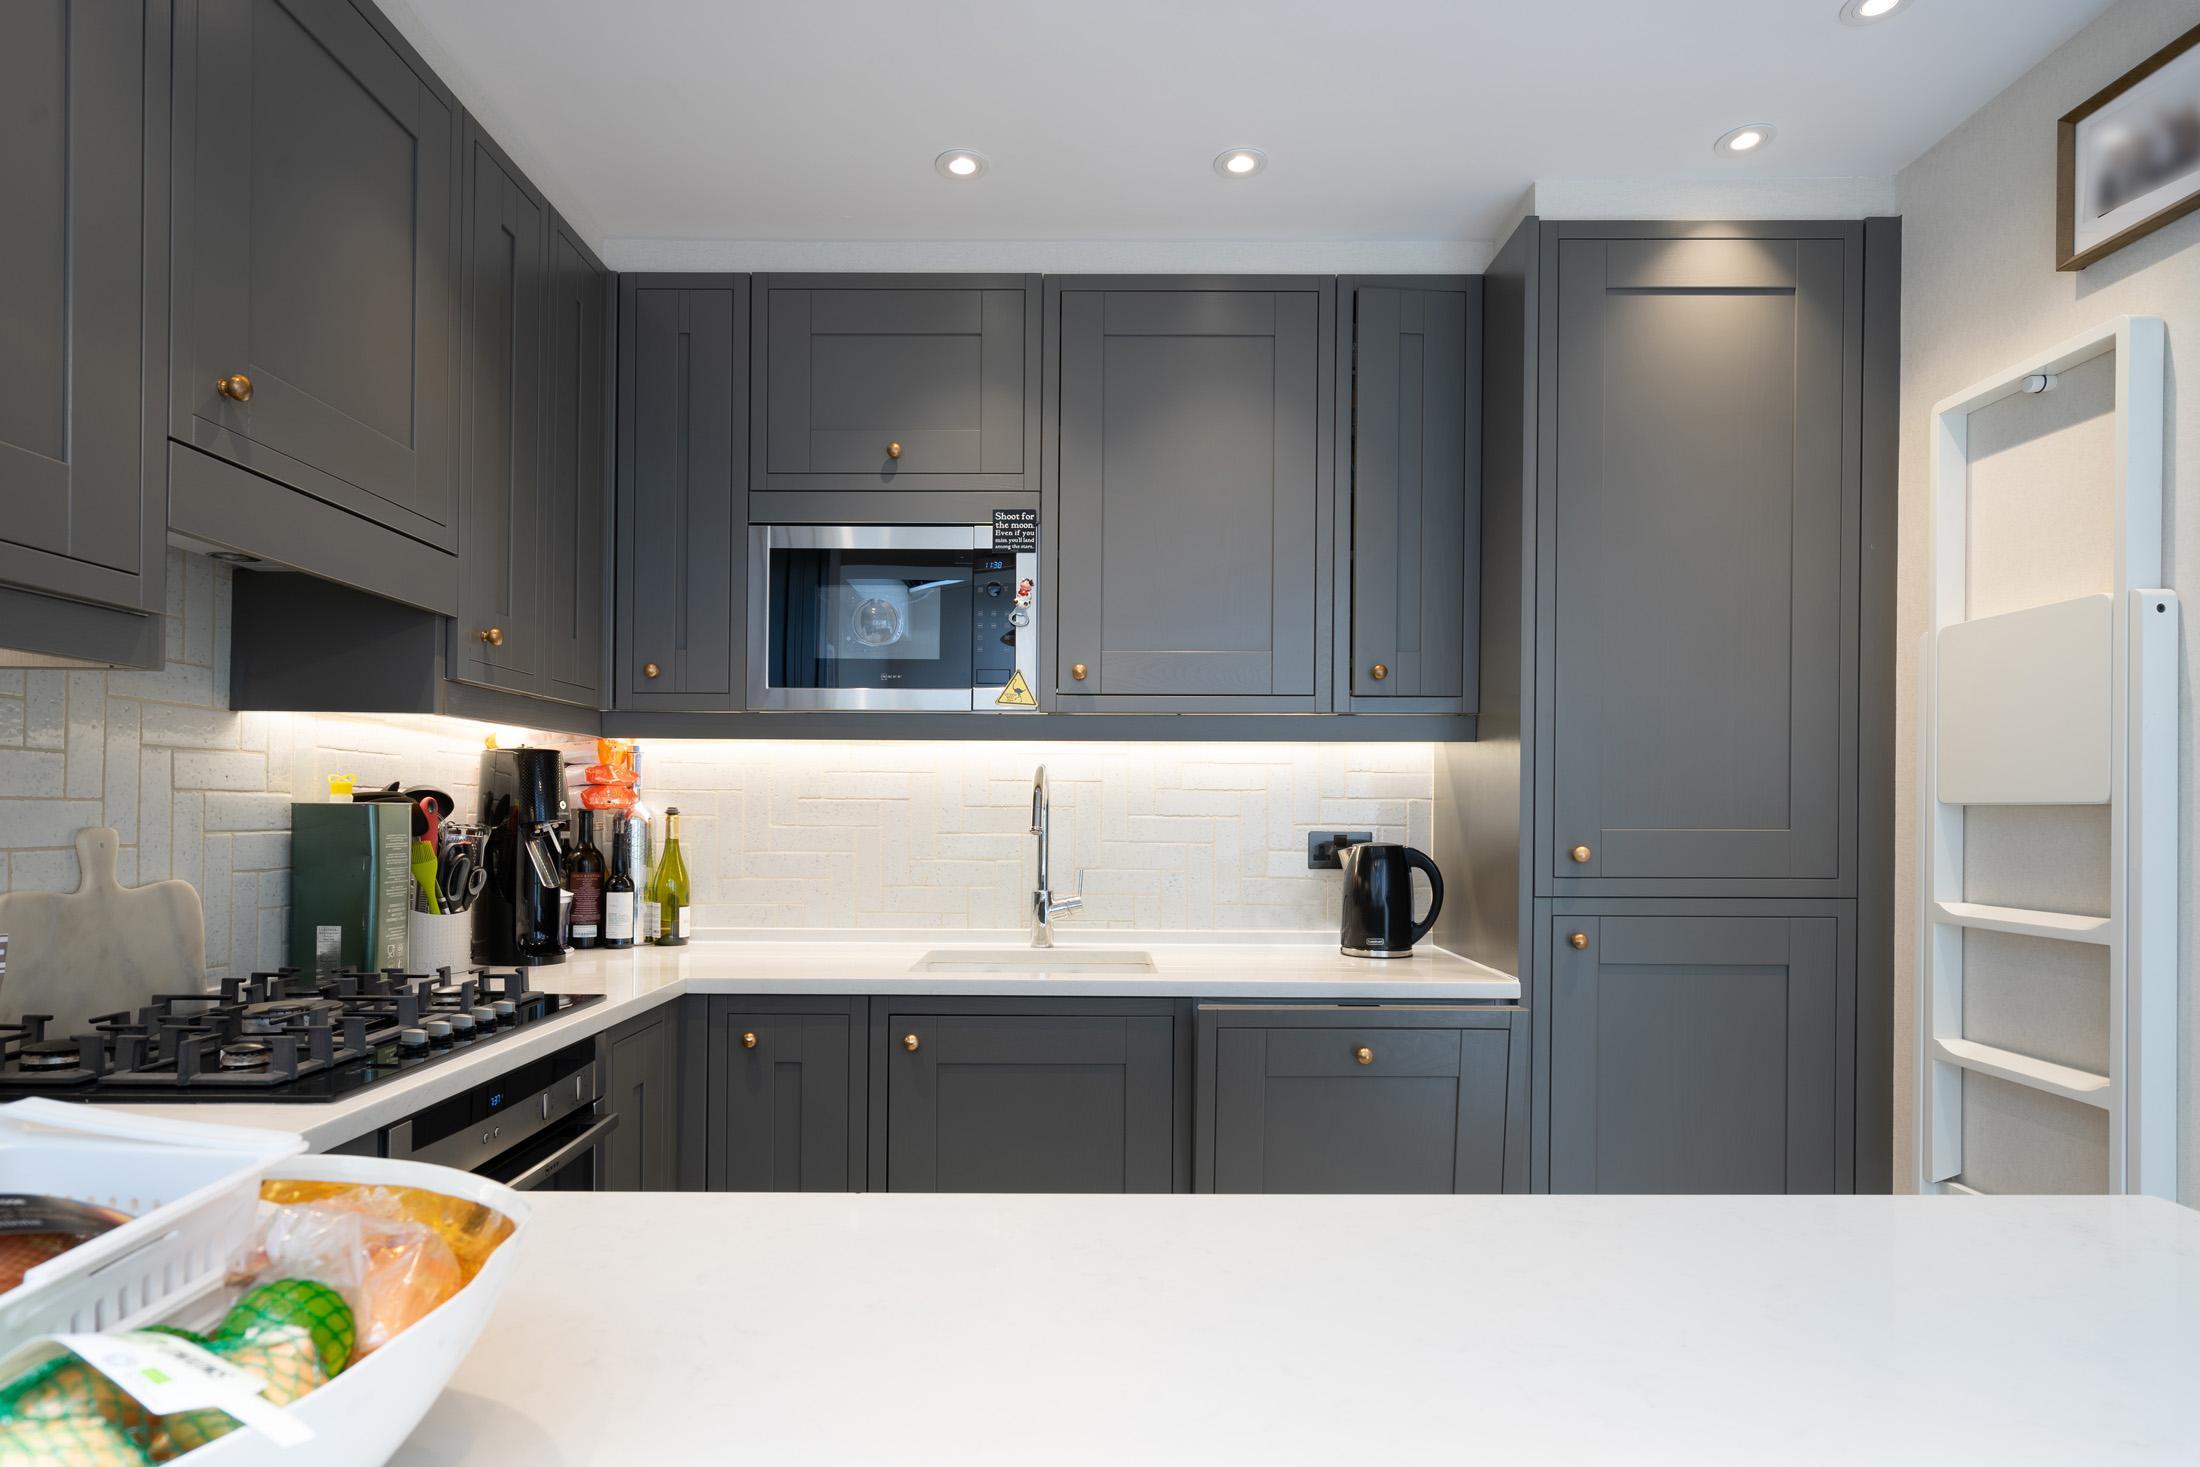 For Rent: Queensdale Road Notting Hill W11 modern kitchen